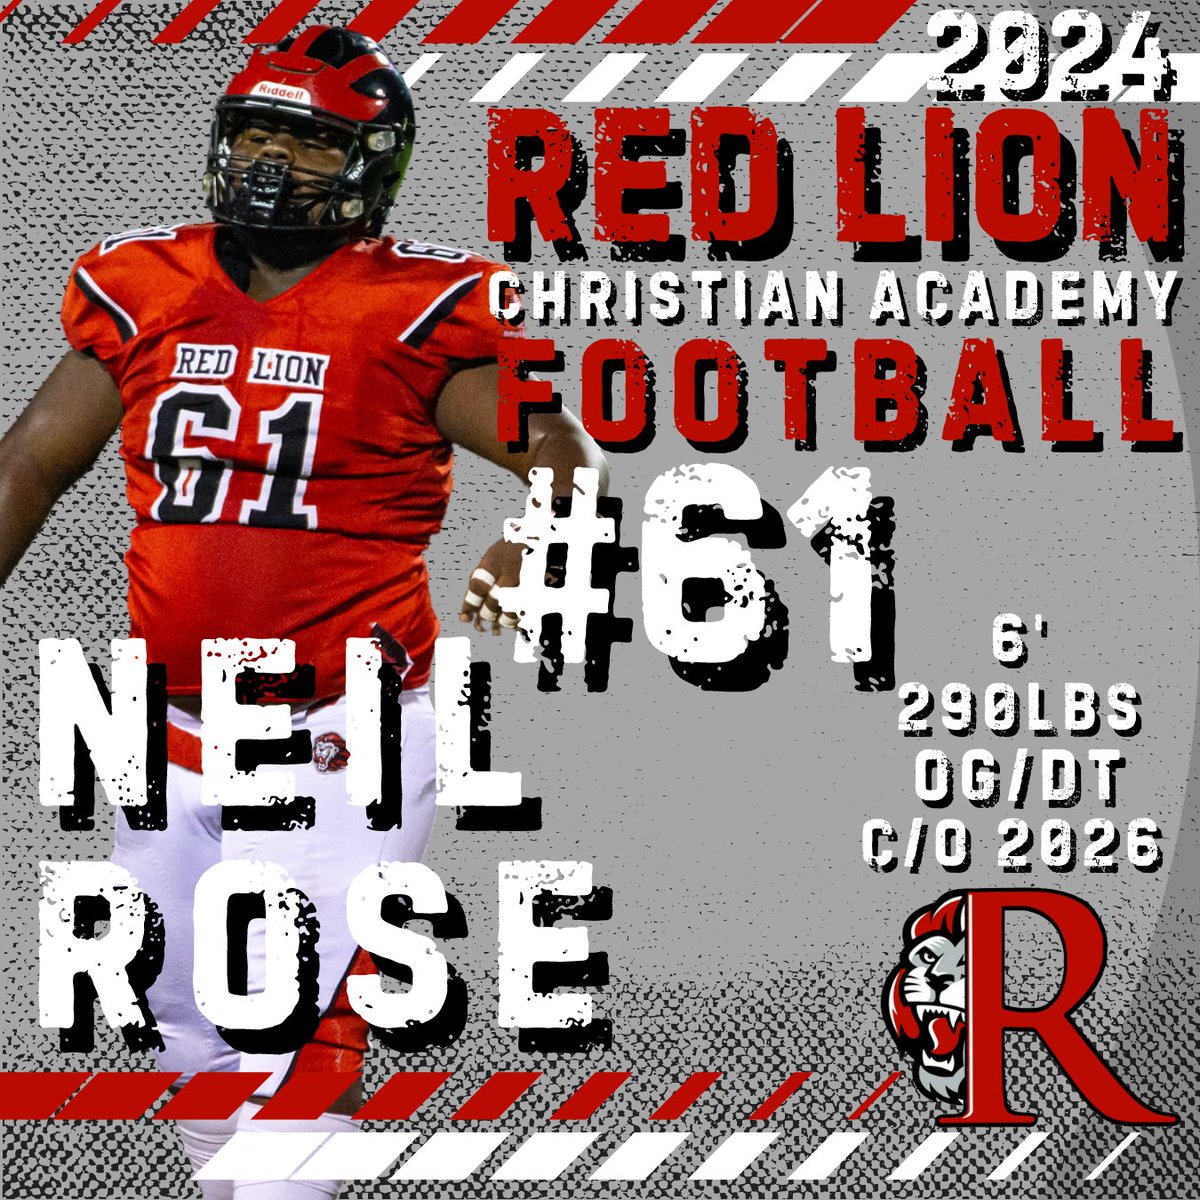 Class of 2026, rising junior @Neilrose26 is a force on both sides of the line. His strength and explosiveness creates a problem for anyone lined up opposite of him on the line.